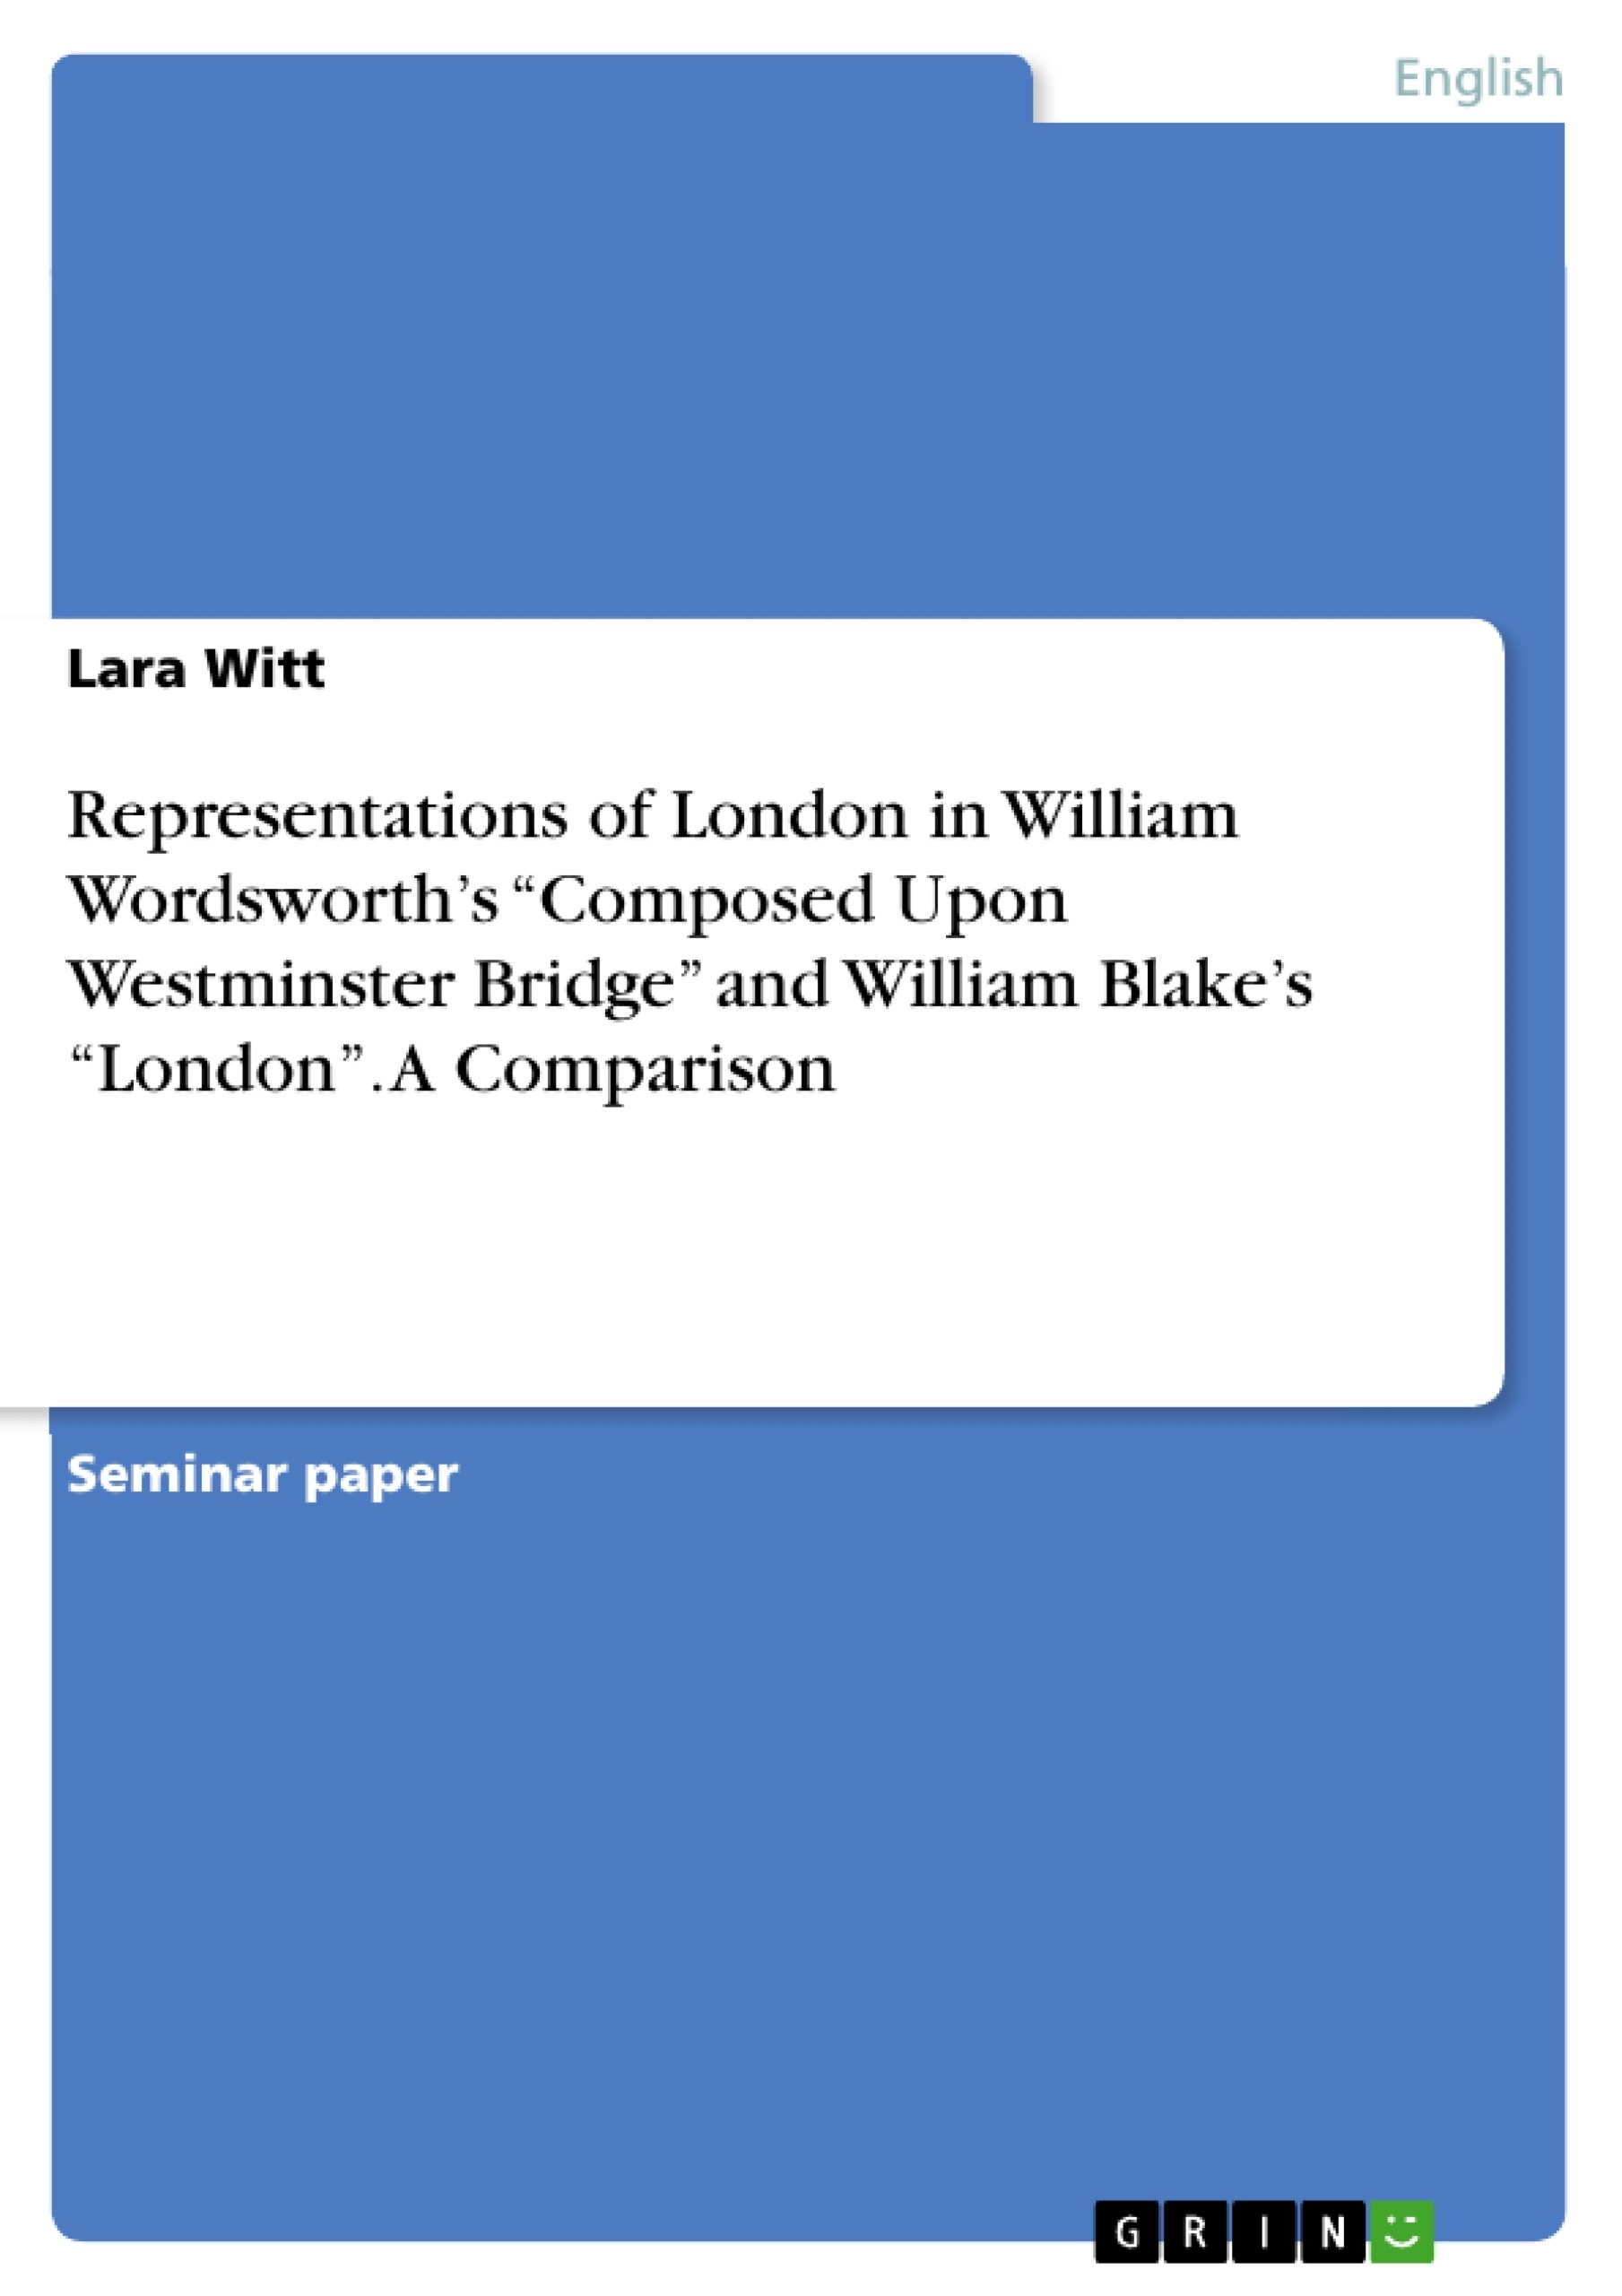 Title: Representations of London in William Wordsworth’s “Composed Upon Westminster Bridge” and William Blake’s “London”. A Comparison